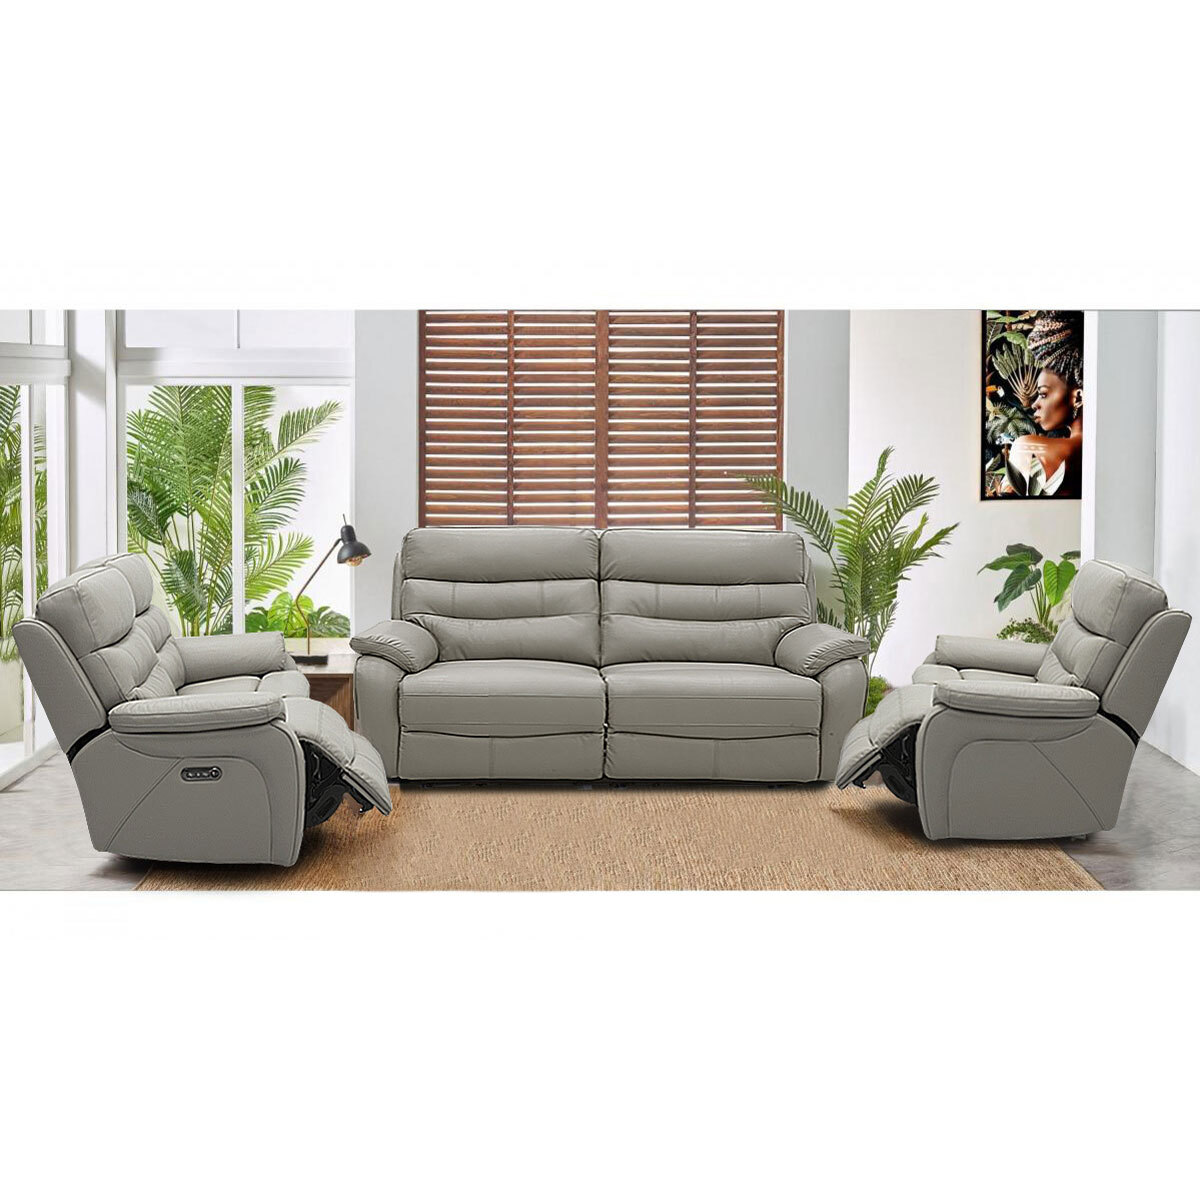 Group Image of Fletcher Sofa Collection